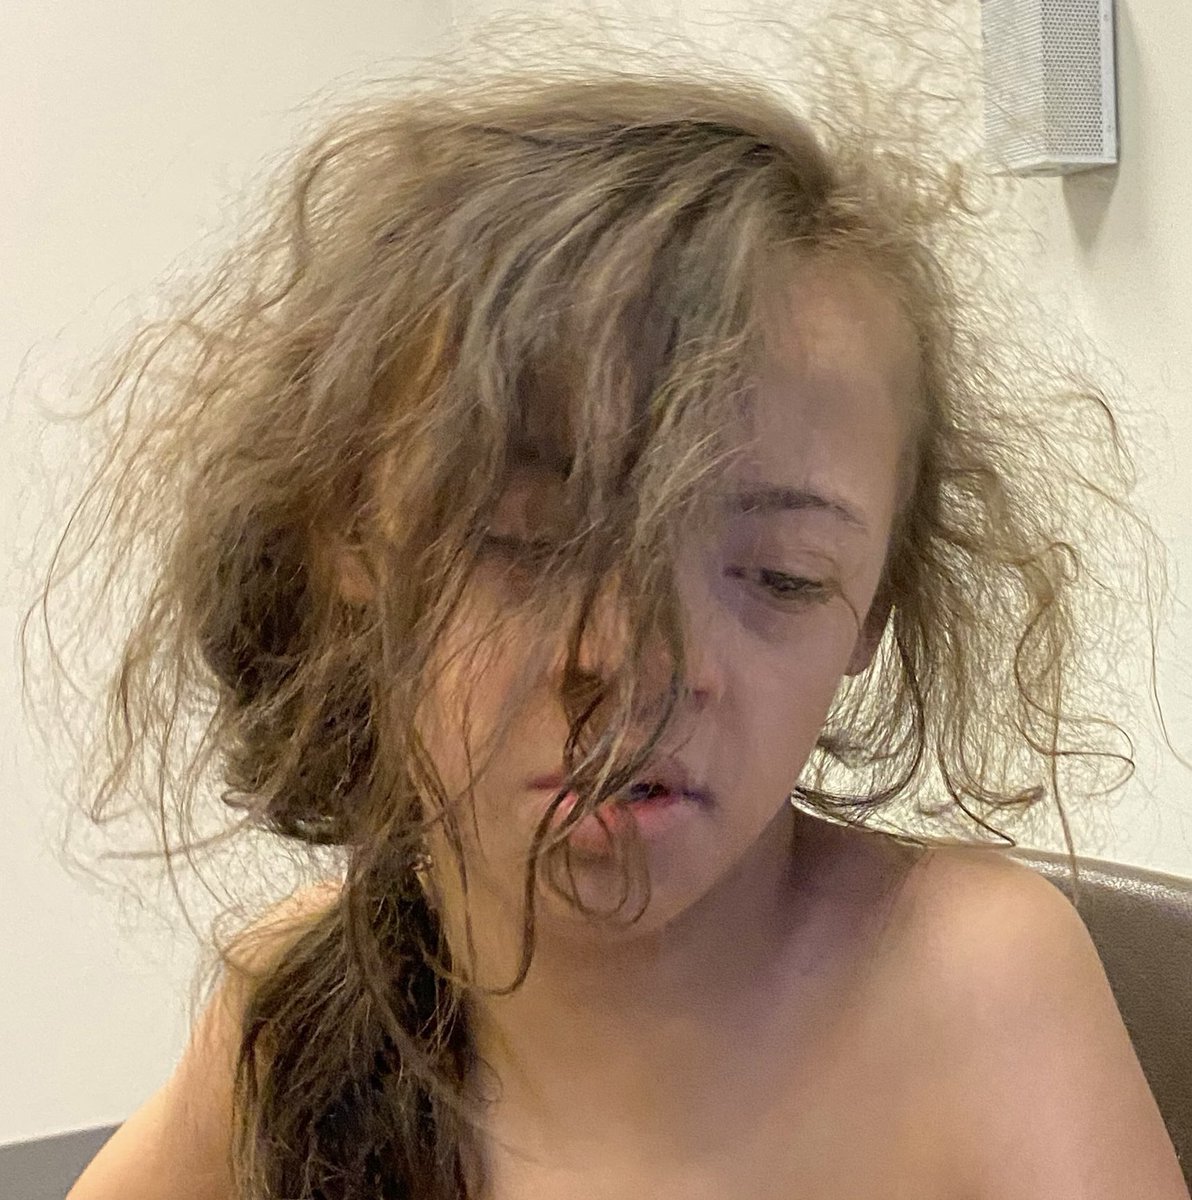 🚨MISSING CHILD🚨 Lincoln Police need your help identifying the parents/residence of this child. They were found wandering in the area of 10th and Superior today. The child is approximately 6 years old. Please call our non-emergency line at 402-441-6000 with any information.